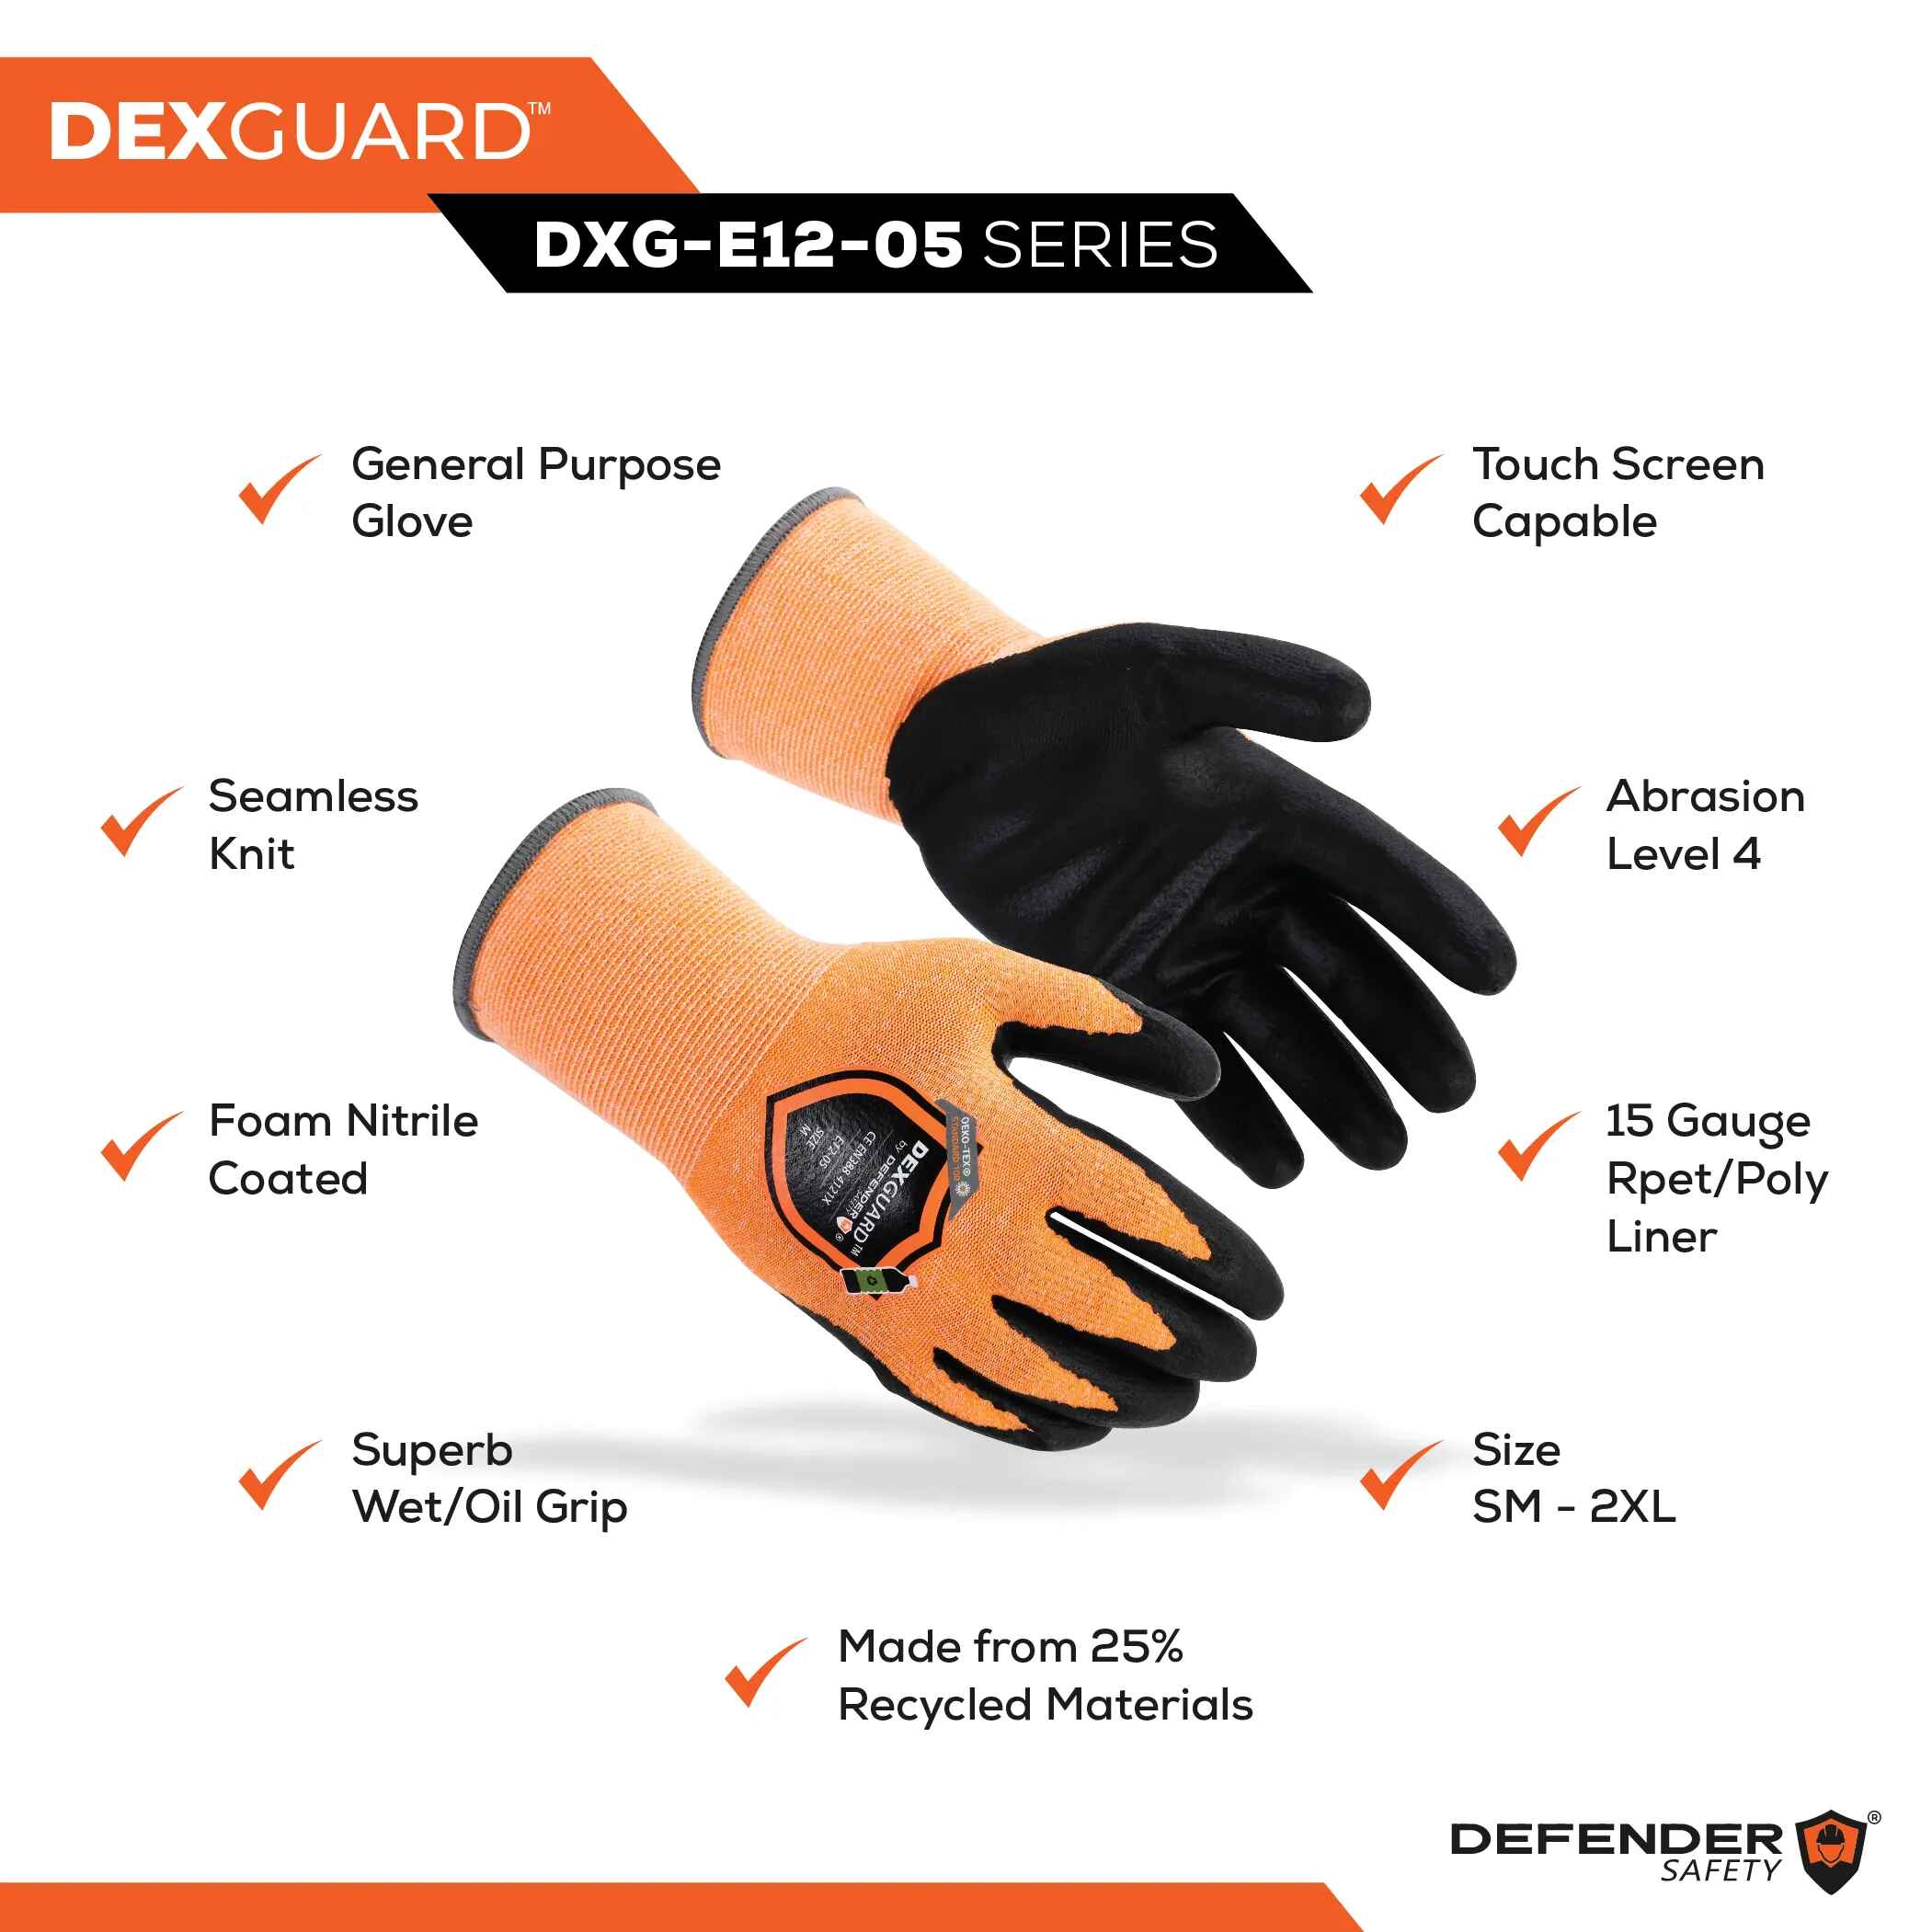 DEXGUARD™ General Purpose Recycled Gloves, Touch Screen Compatible, Abrasion Resistant Level 4, Foam Nitrile Coating - Defender Safety